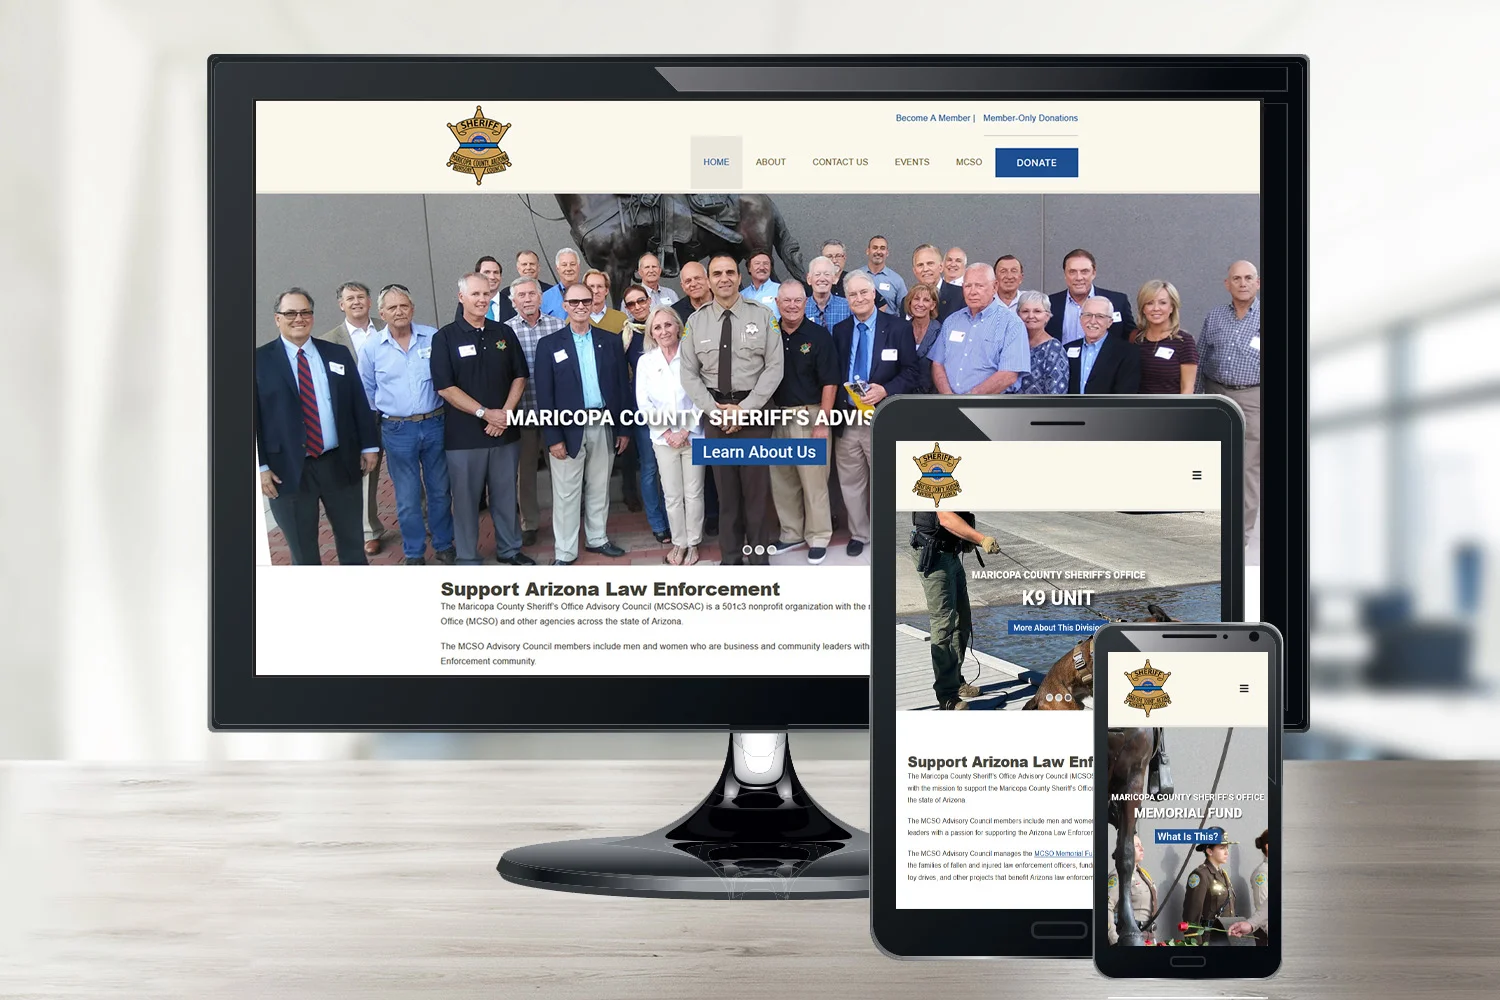 Nonprofit website for the Maricopa County Sheriff's Office's Advisory Council